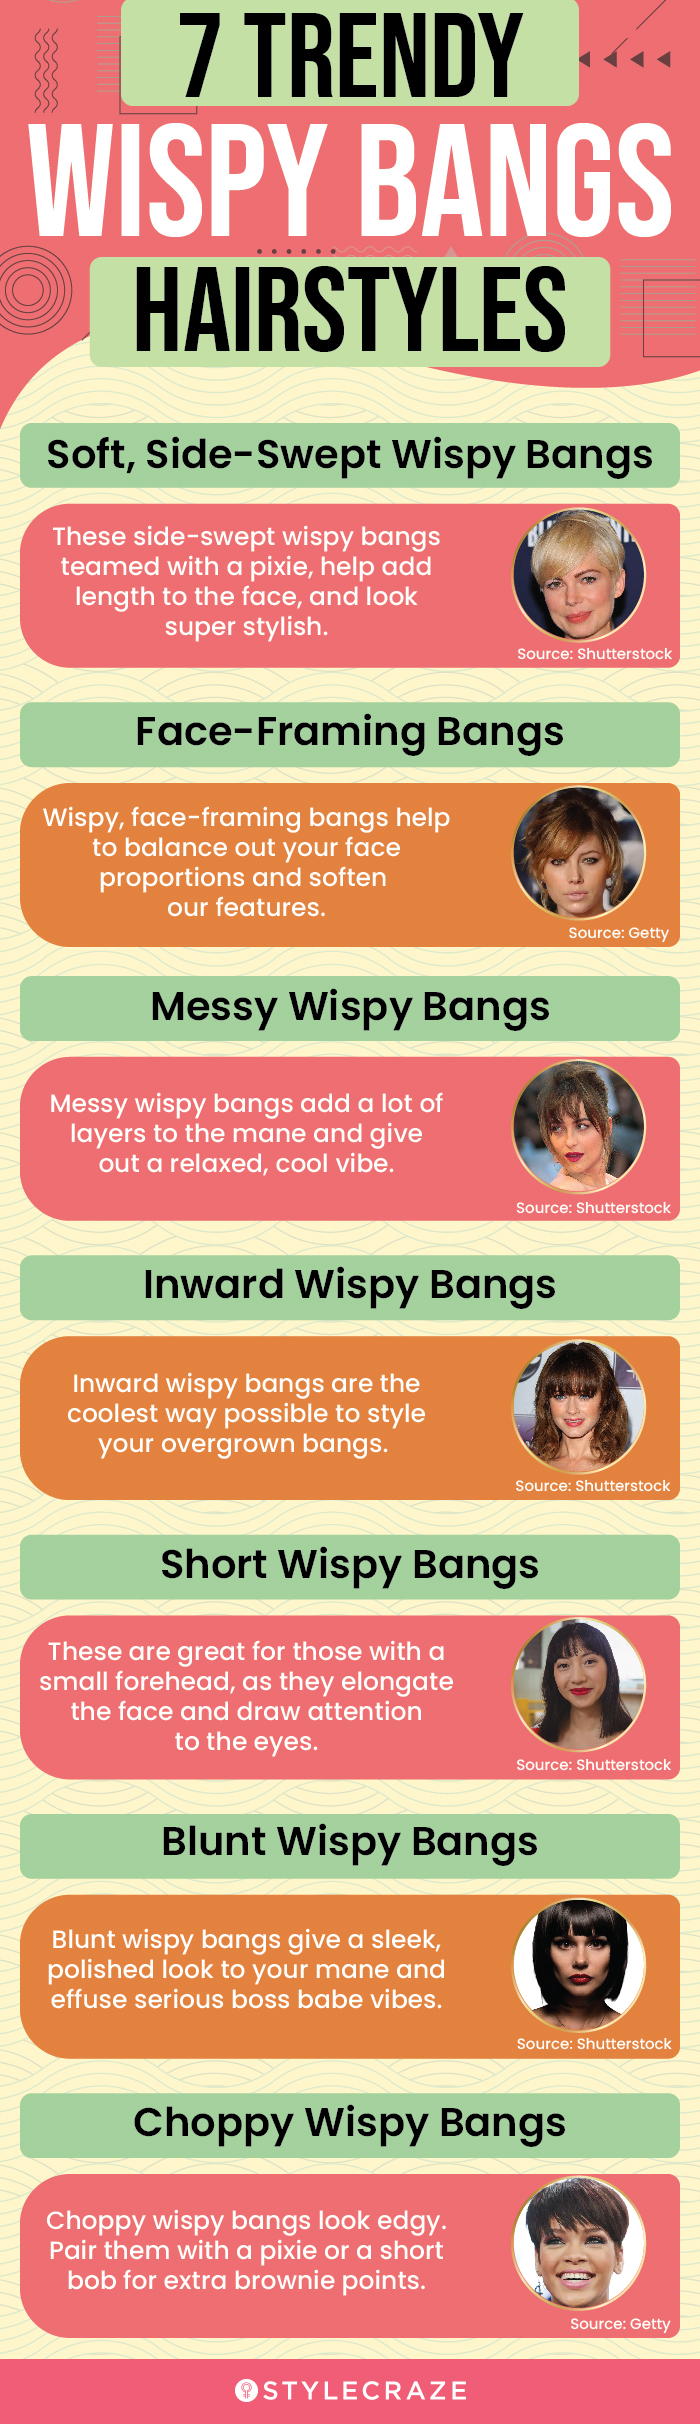 7 trendy wispy bangs hairstyles (infographic)